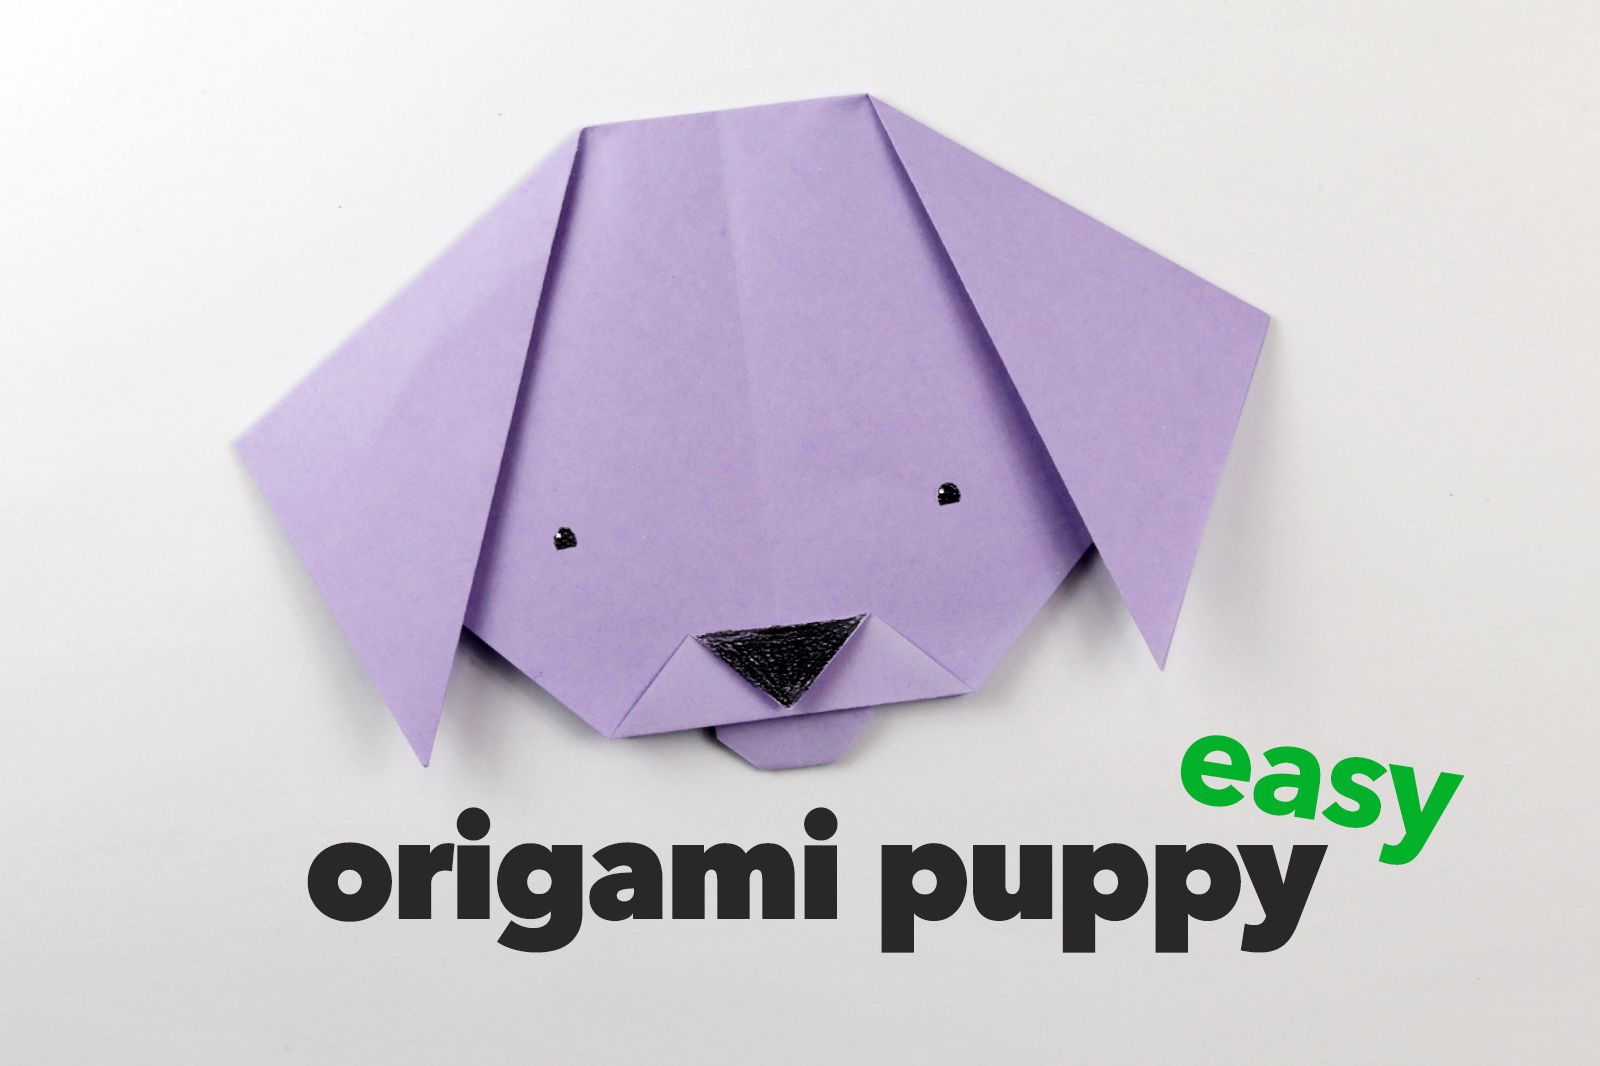 How To Make A Origami Dog Face 10 Origami Projects For Kids